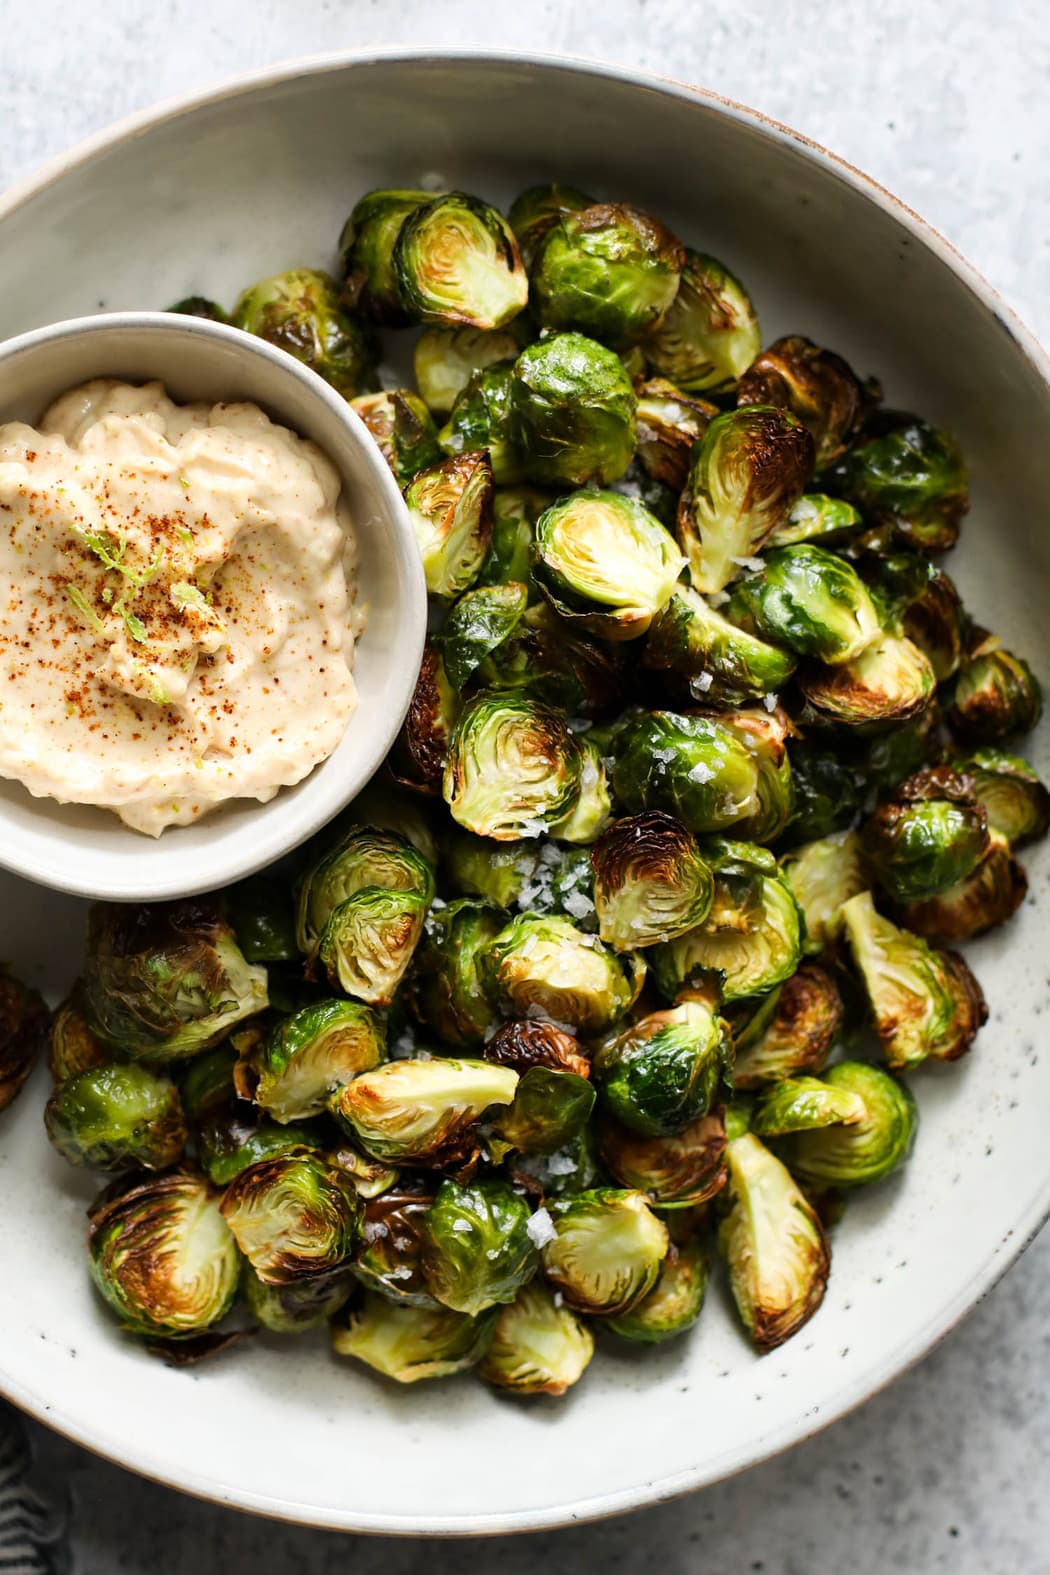 https://therealfooddietitians.com/wp-content/uploads/2021/10/Air-Fryer-Brussels-Sprouts-12-of-24.jpg